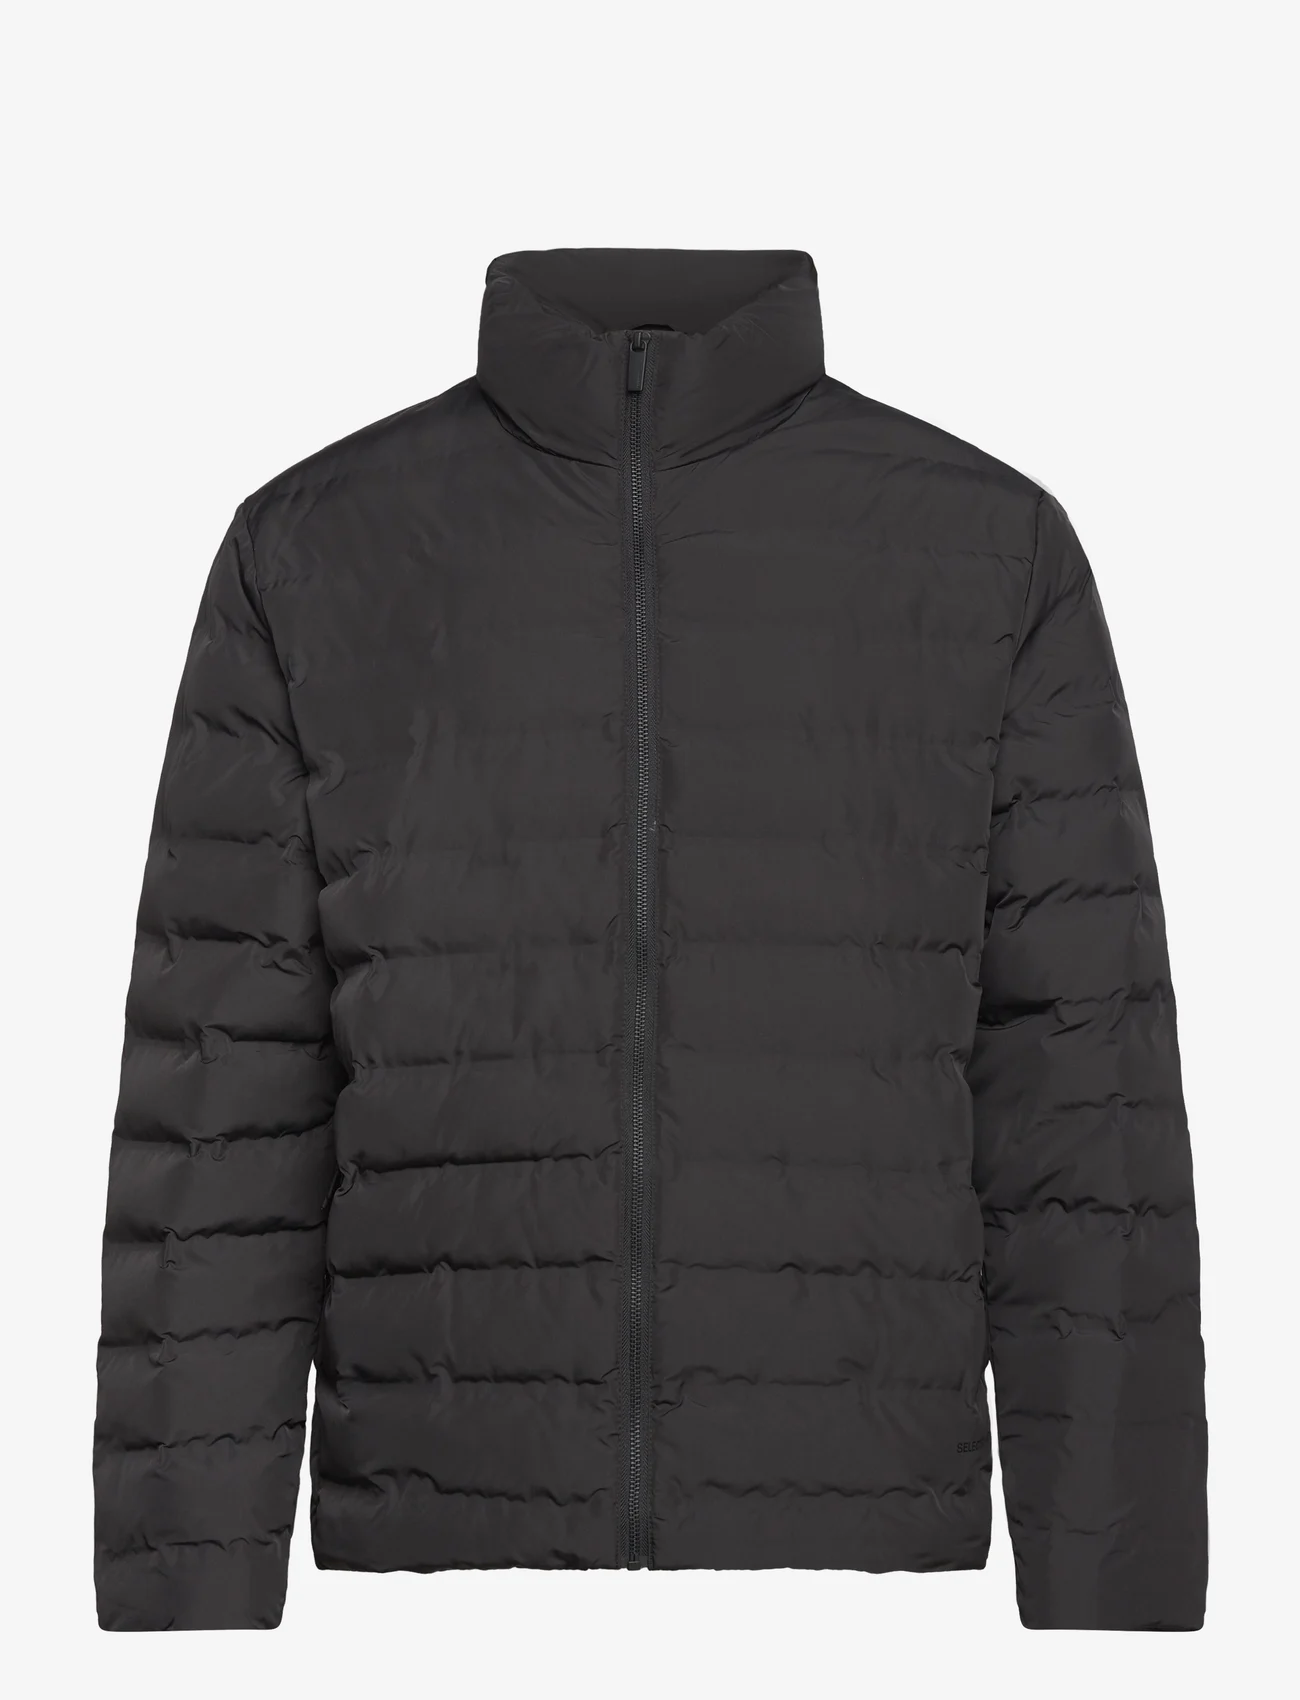 Selected Homme - SLHBARRY QUILTED JACKET NOOS - talvitakit - stretch limo - 0